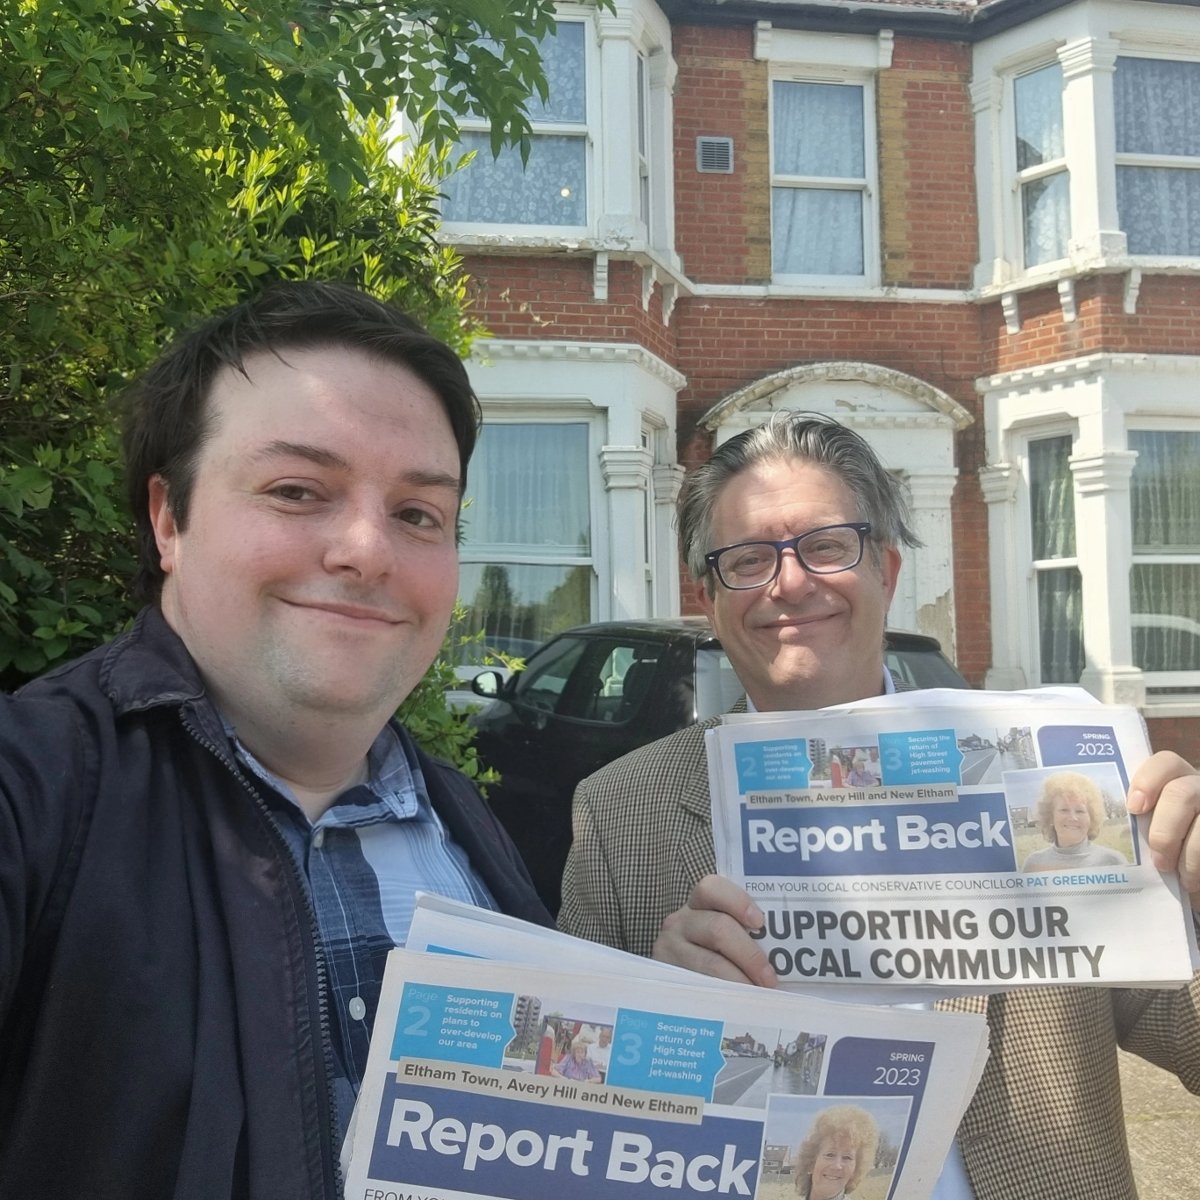 Lovely day out with @GreenwichTories today supporting @ElthamTories who are doing great work holding the local council to account.

Khan's #Ulez Expansion will hit #Eltham particularly hard if passed.

@CDavisEltham @RogerMTester @JamesCowling10 @Belvederebrooks @ThomasFTurrell